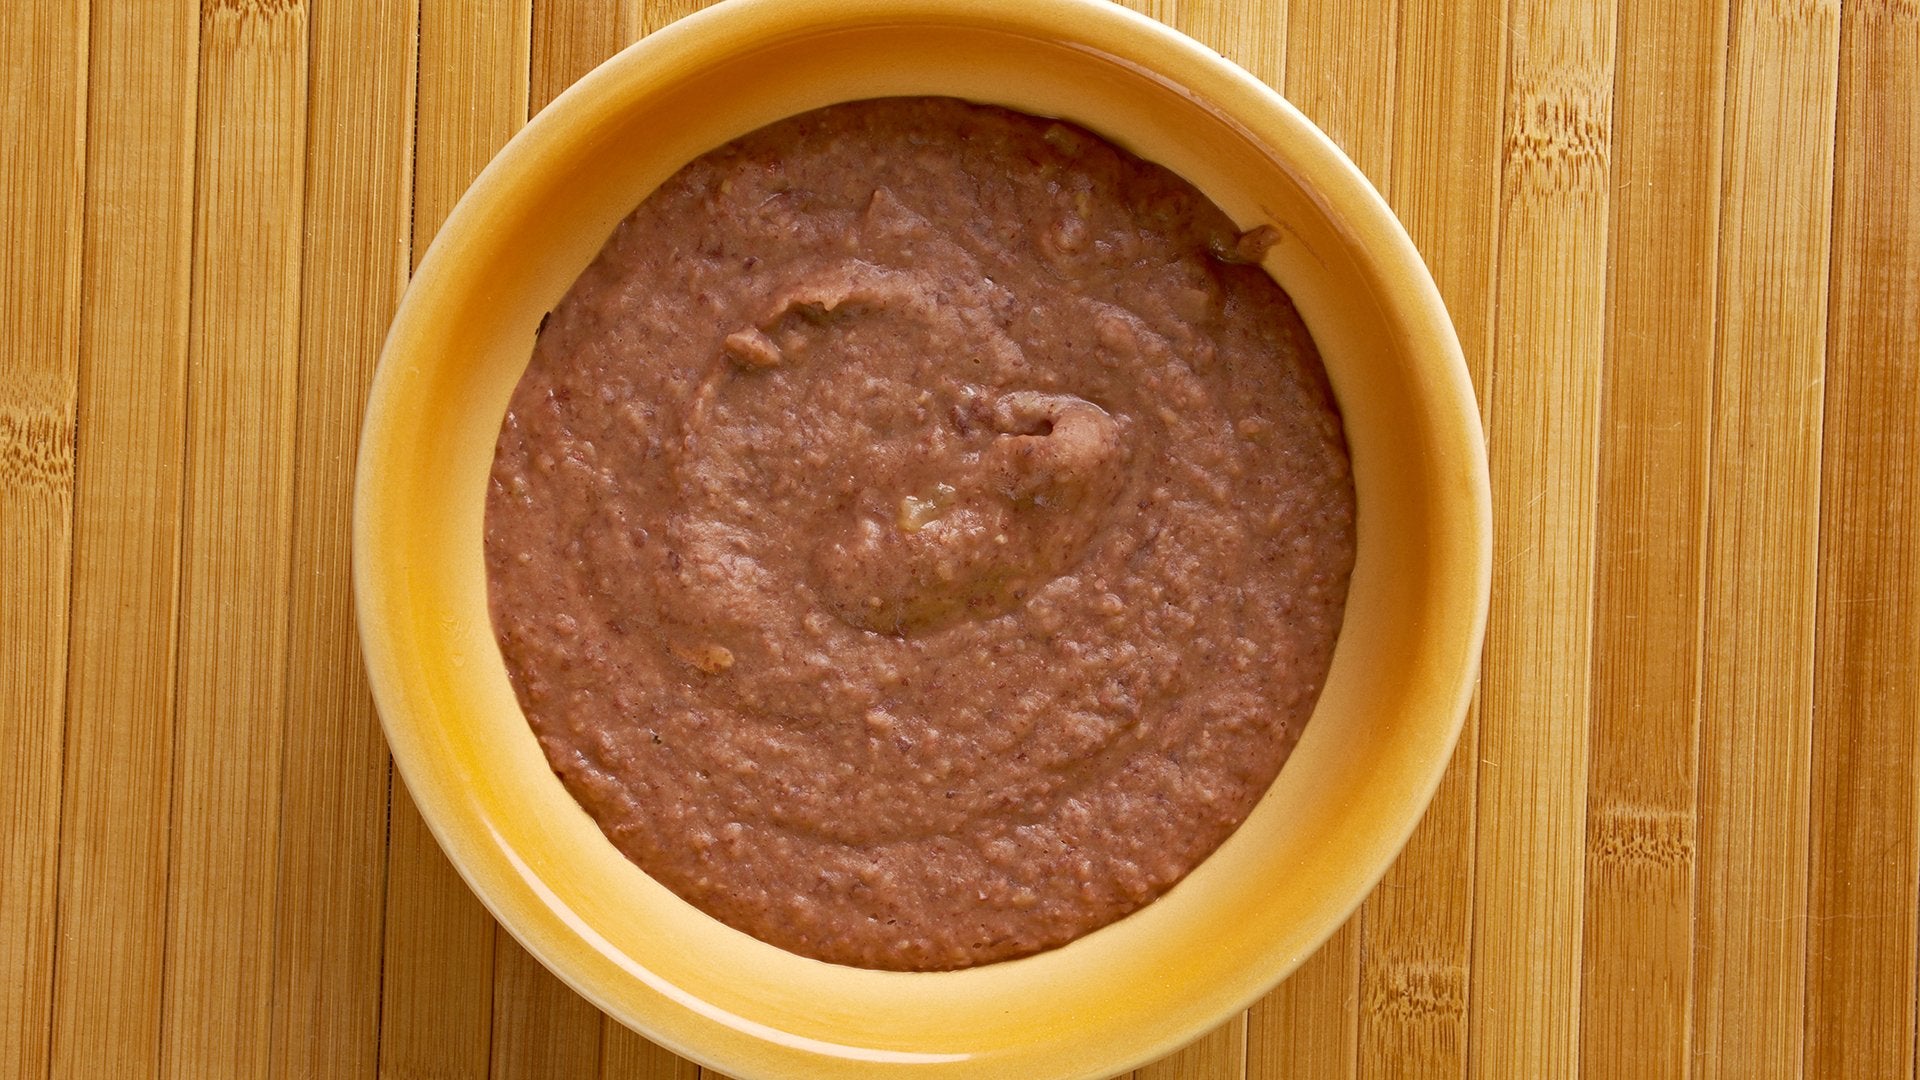 Spicy Refried Black Beans